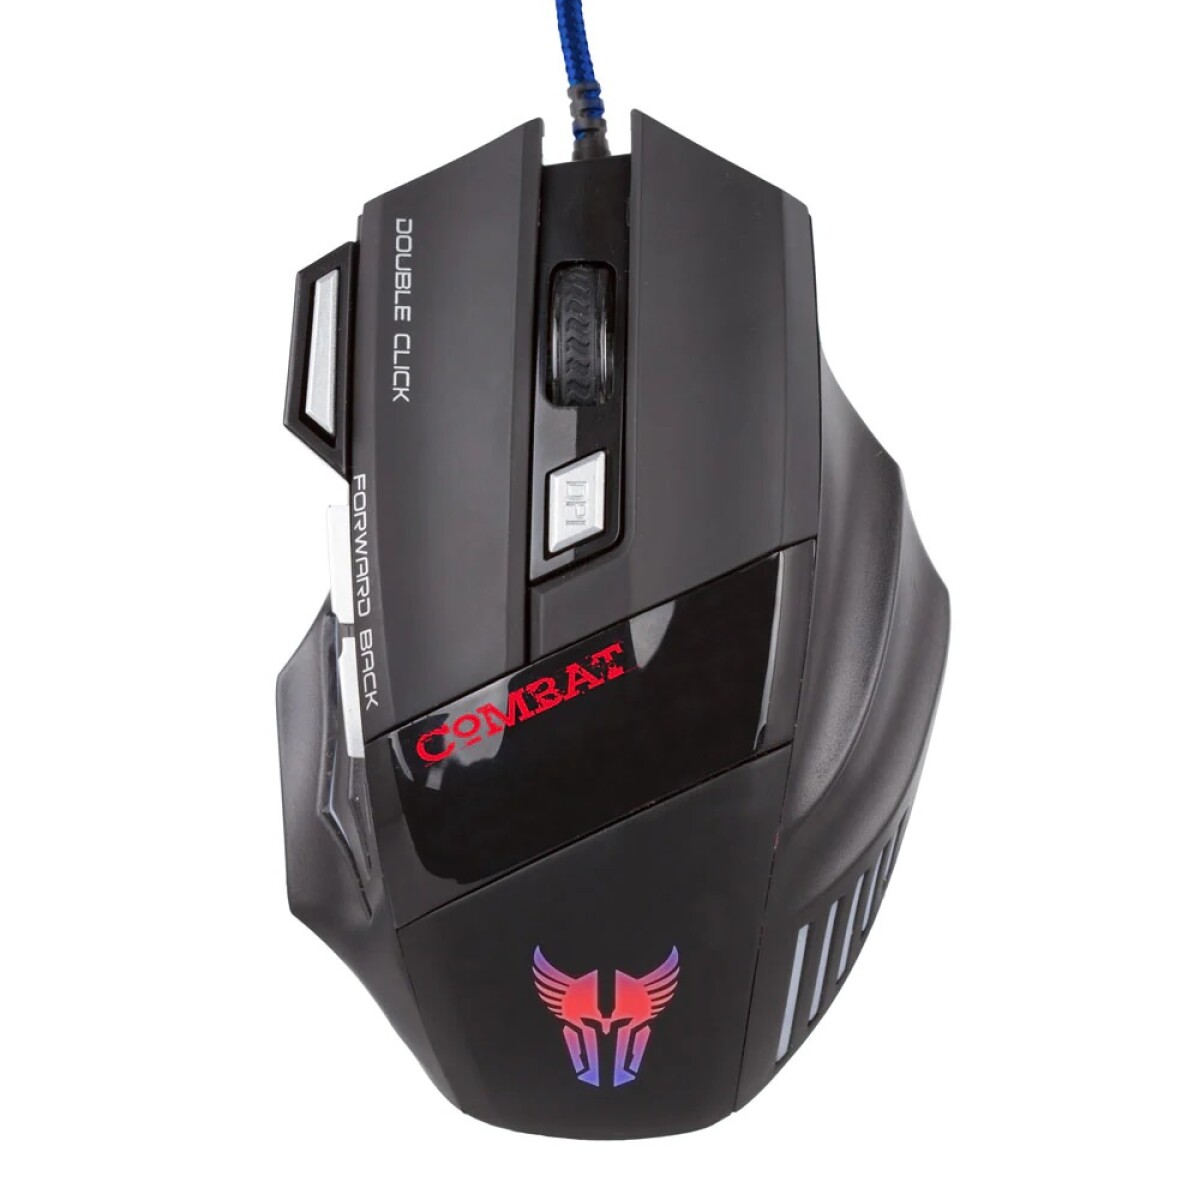 MOUSE GAMING COMBAT MS42 USB 7 BOTONES,COLOR NEGRO - 001 